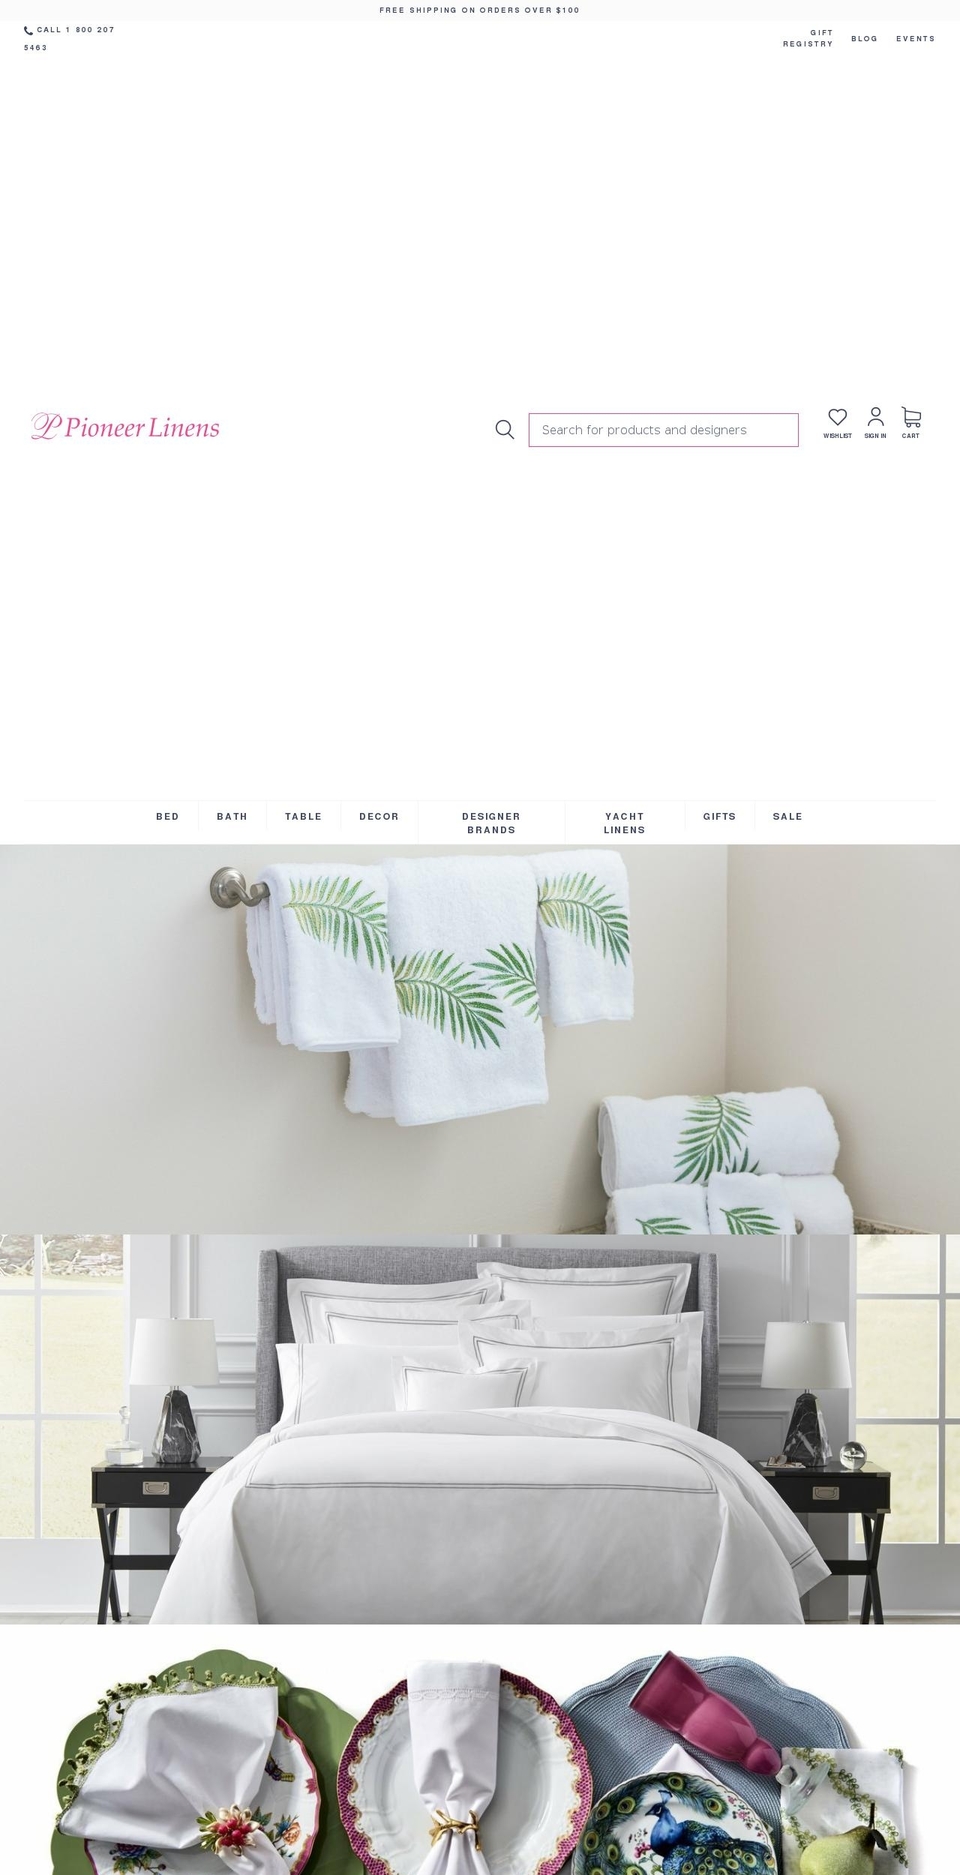 Buko Shopify Theme - Products Consolidation Shopify theme site example palmbeachyachtlinens.com